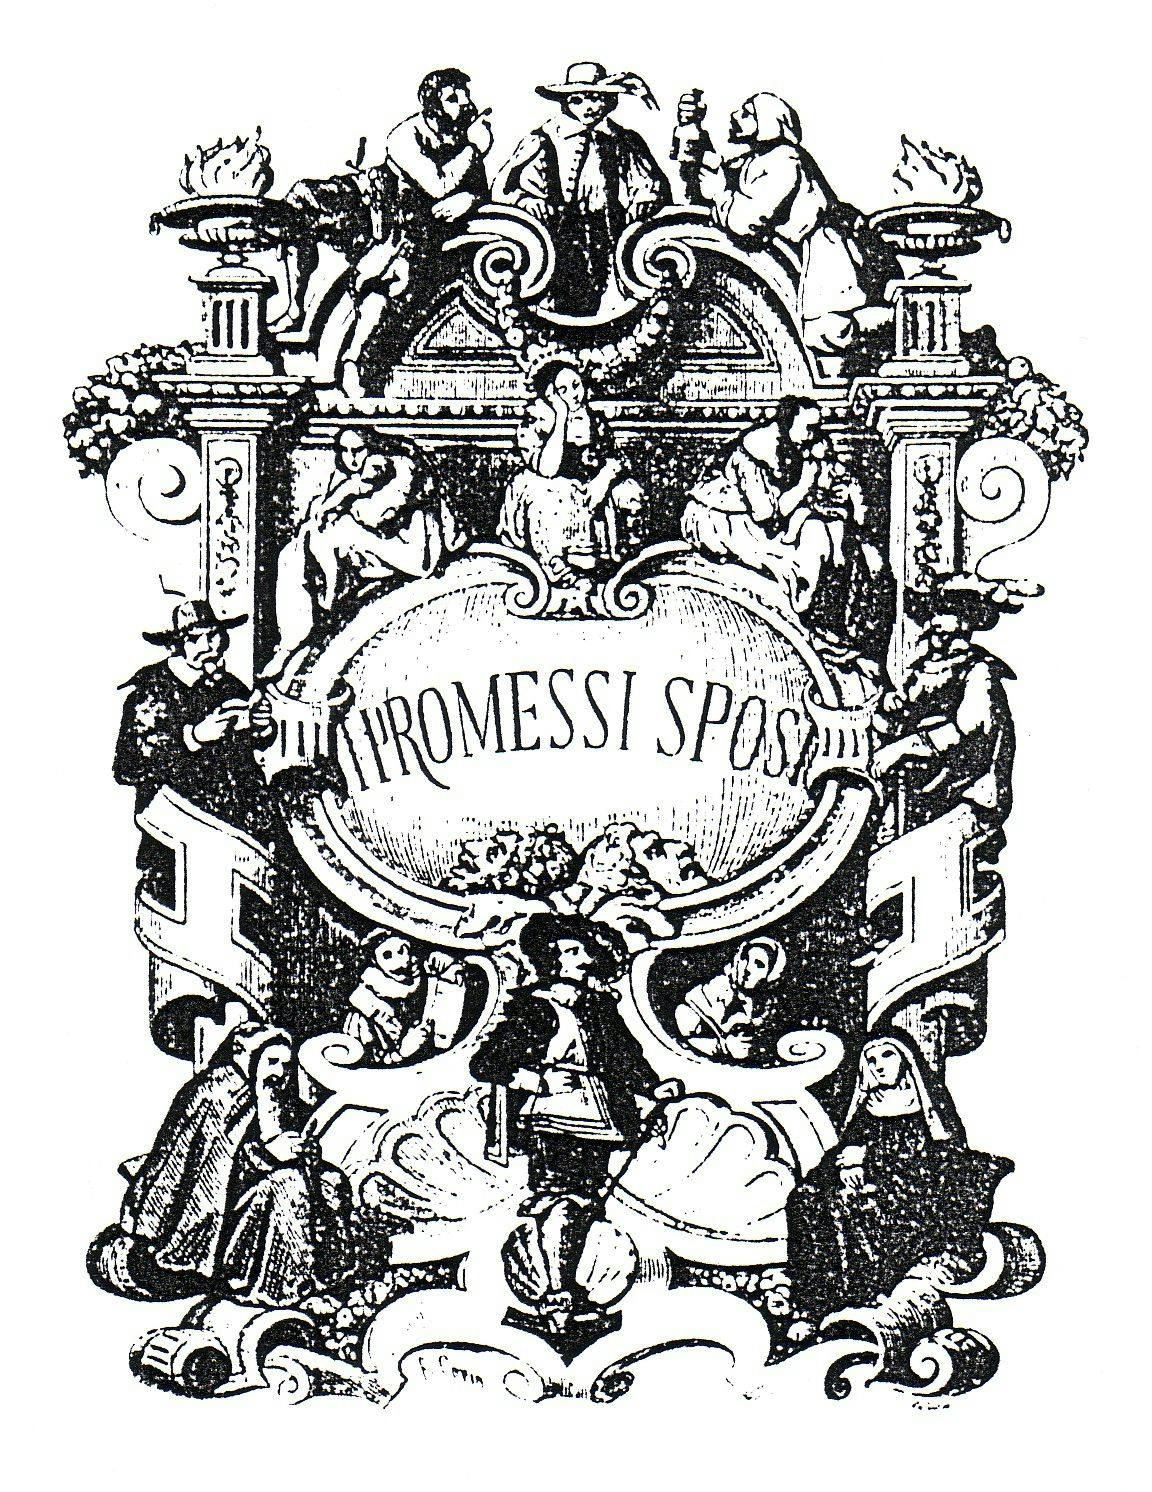 Frontispiece of the second edition of Alessandro Manzoni's The Betrothed (1840) (Francesco Gonin, Public domain, via Wikimedia Commons)